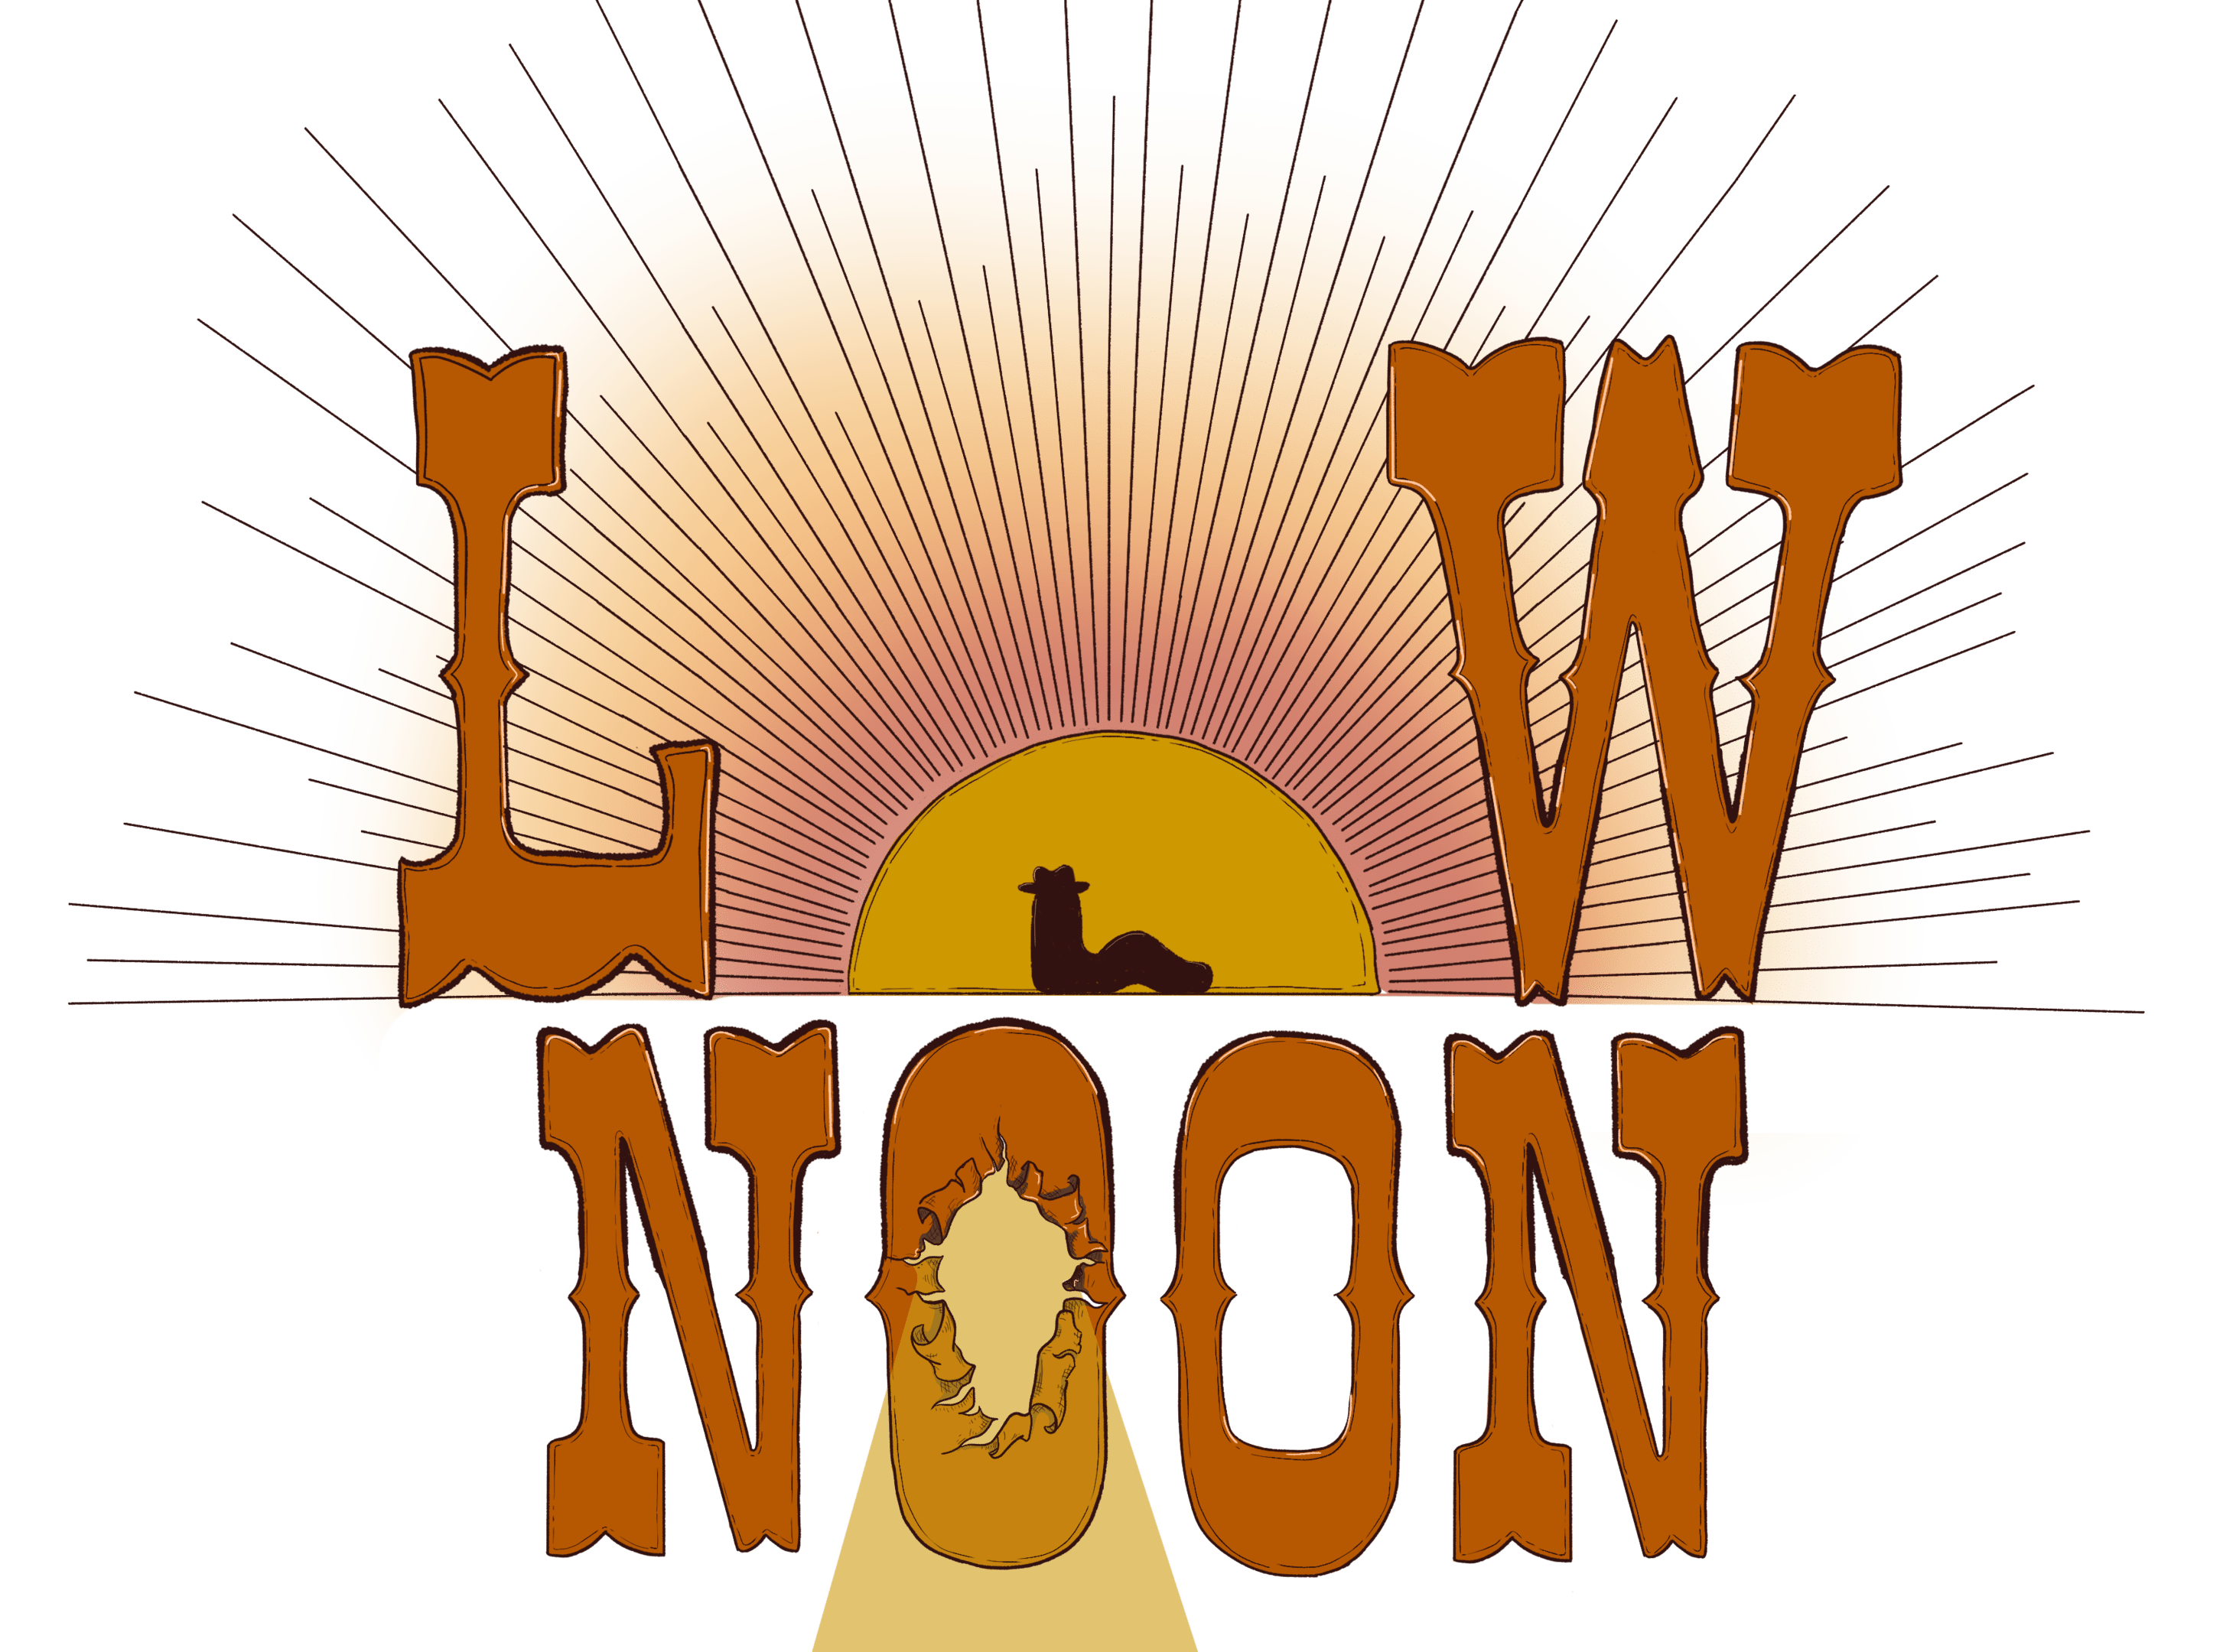 Low Noon